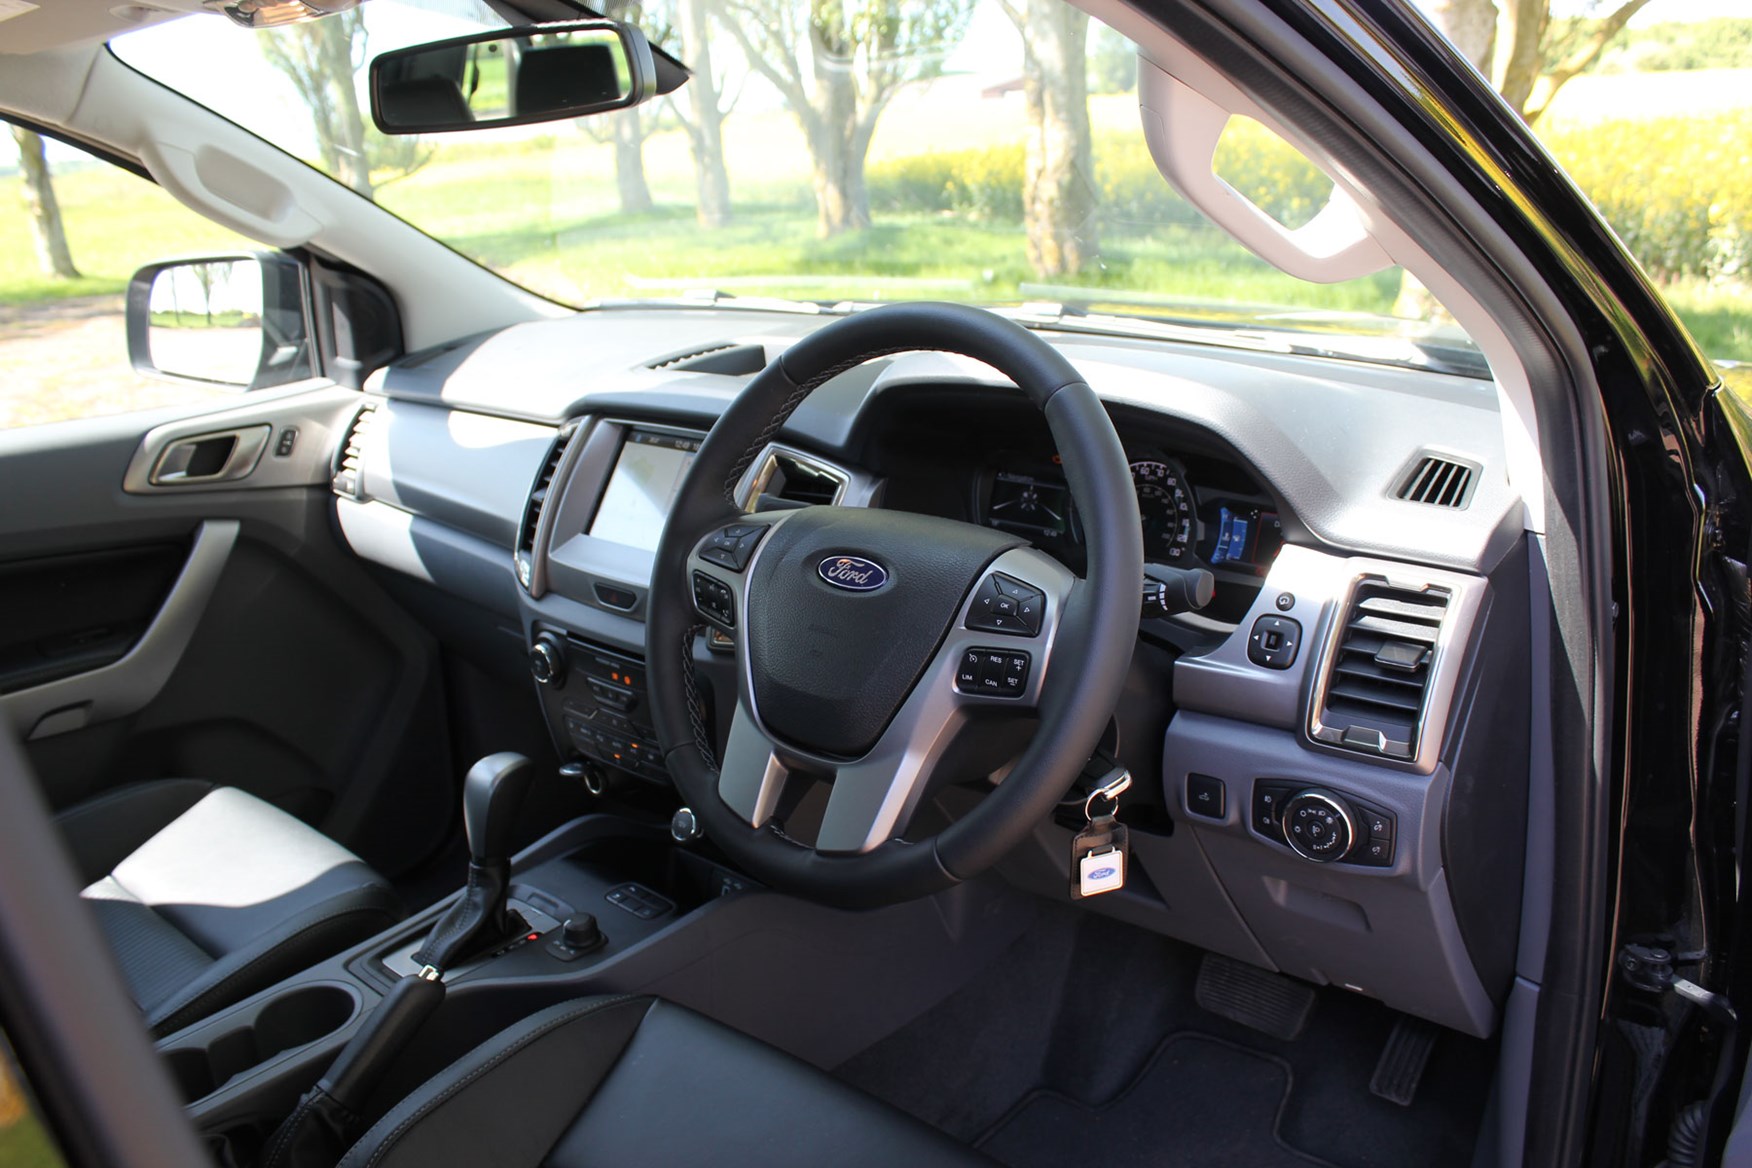 Ford Ranger Black Edition review - cab interior